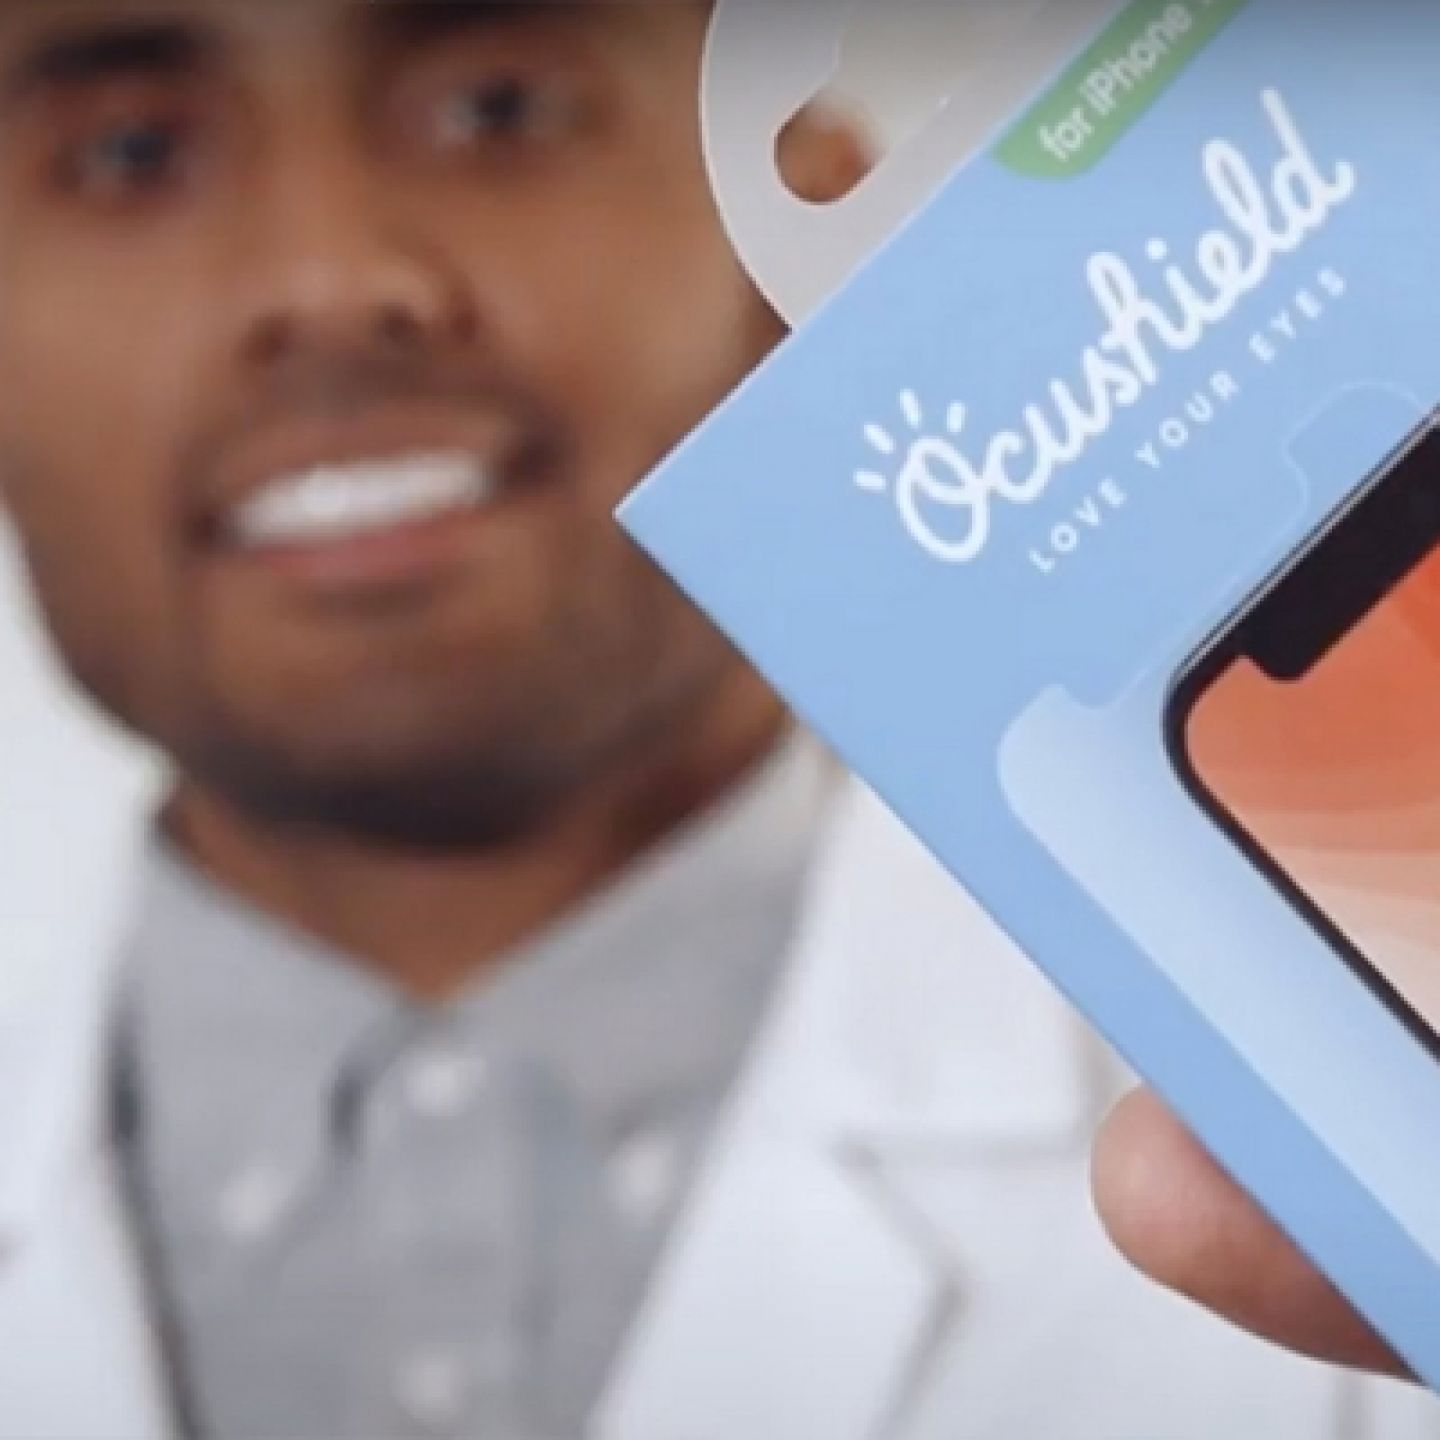 Dhruvin Patel holding Ocushield screen protector packaging 